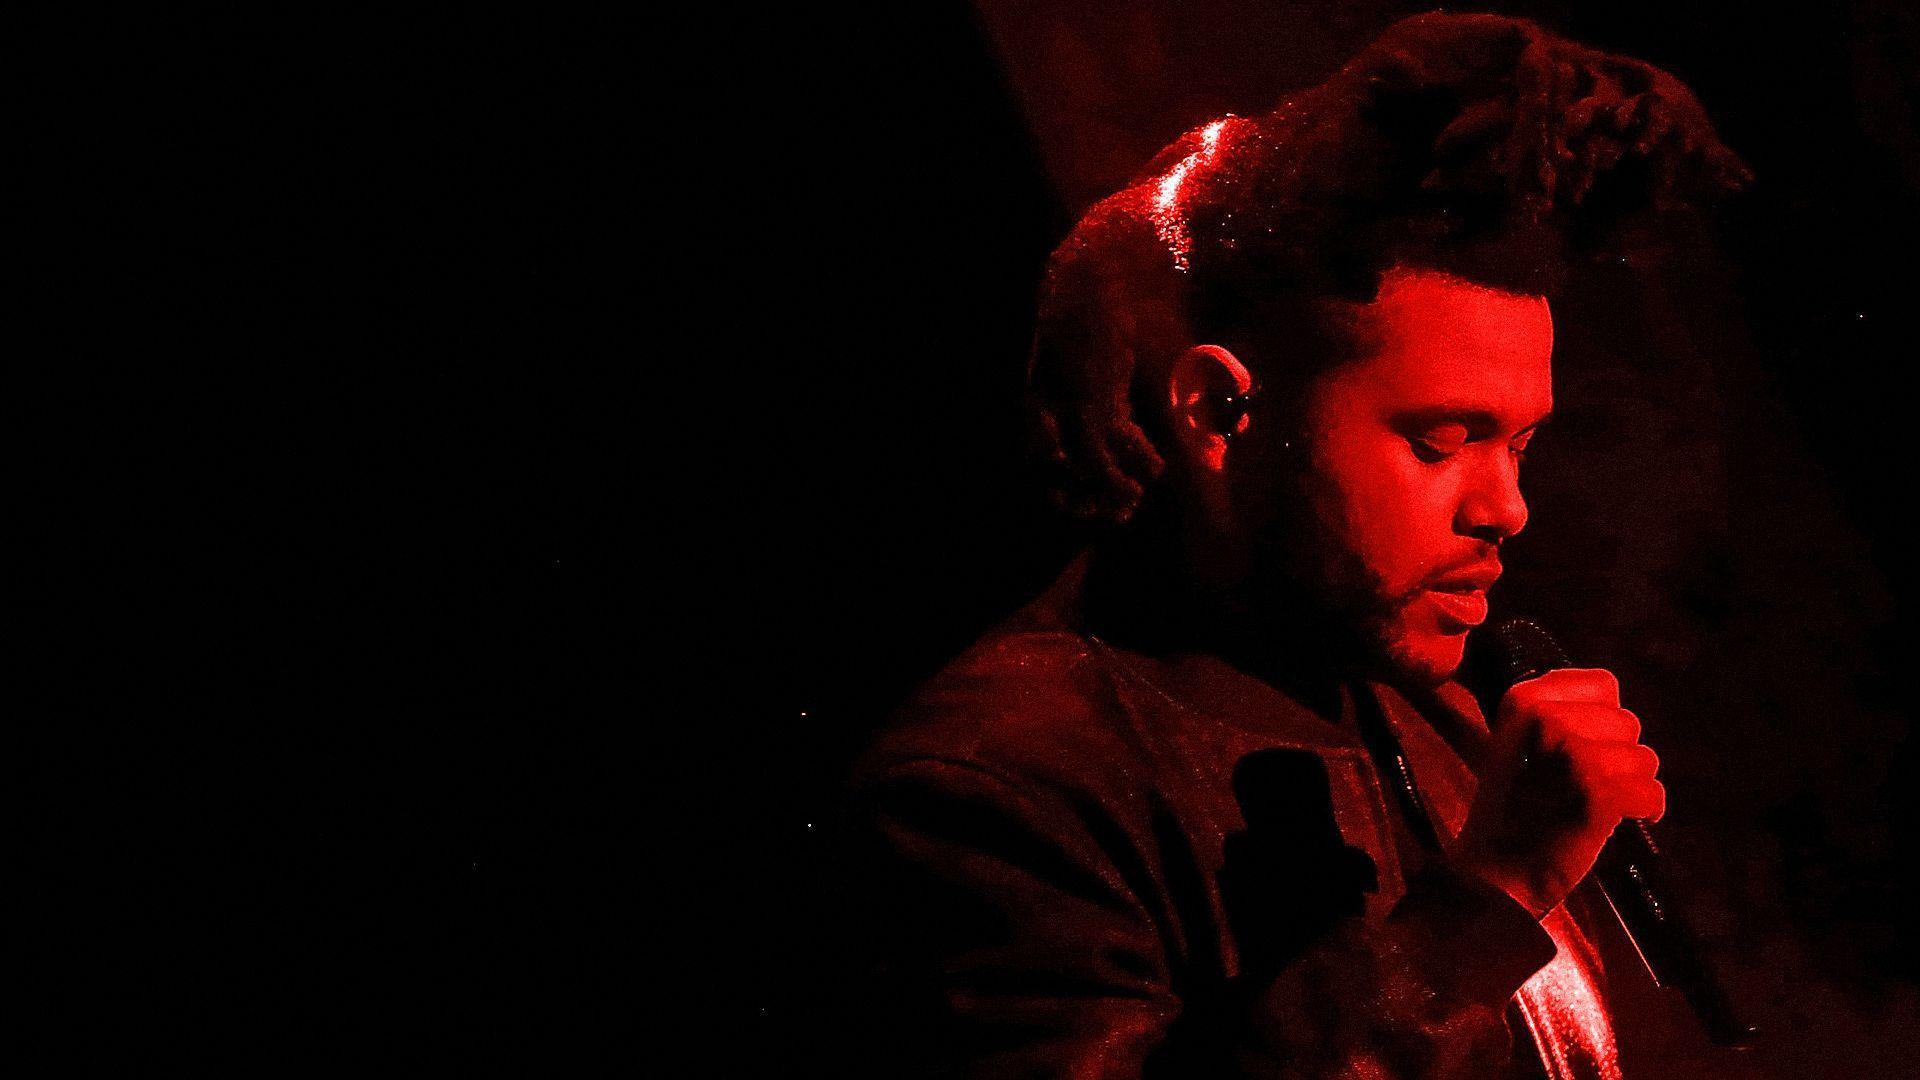 The Weeknd Wallpapers Wallpaper Cave